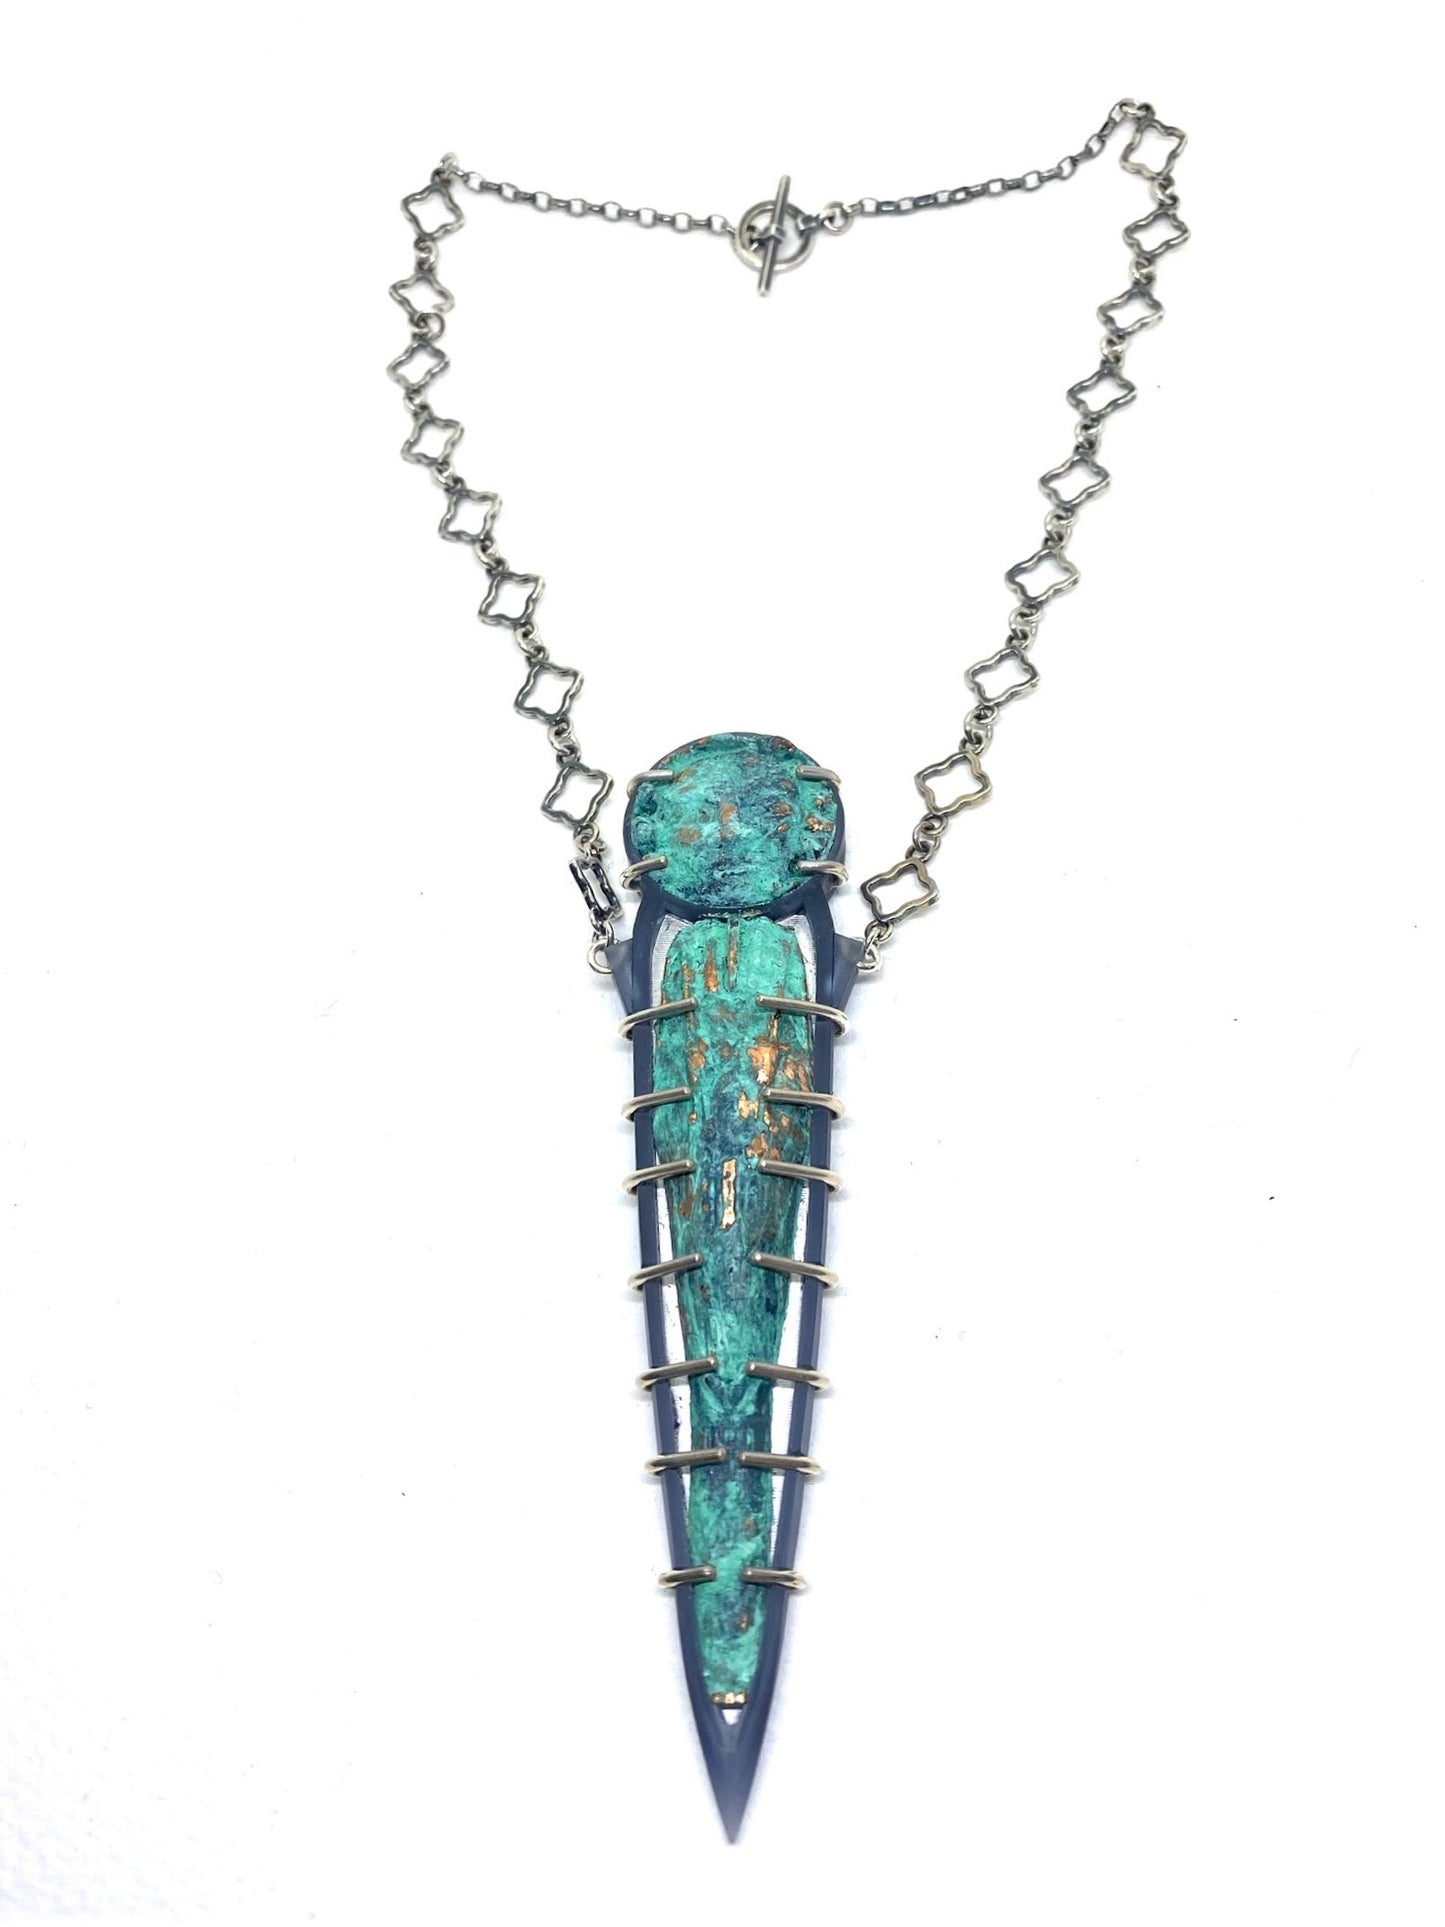 Ushabti Reliquary Necklace Sterling Silver